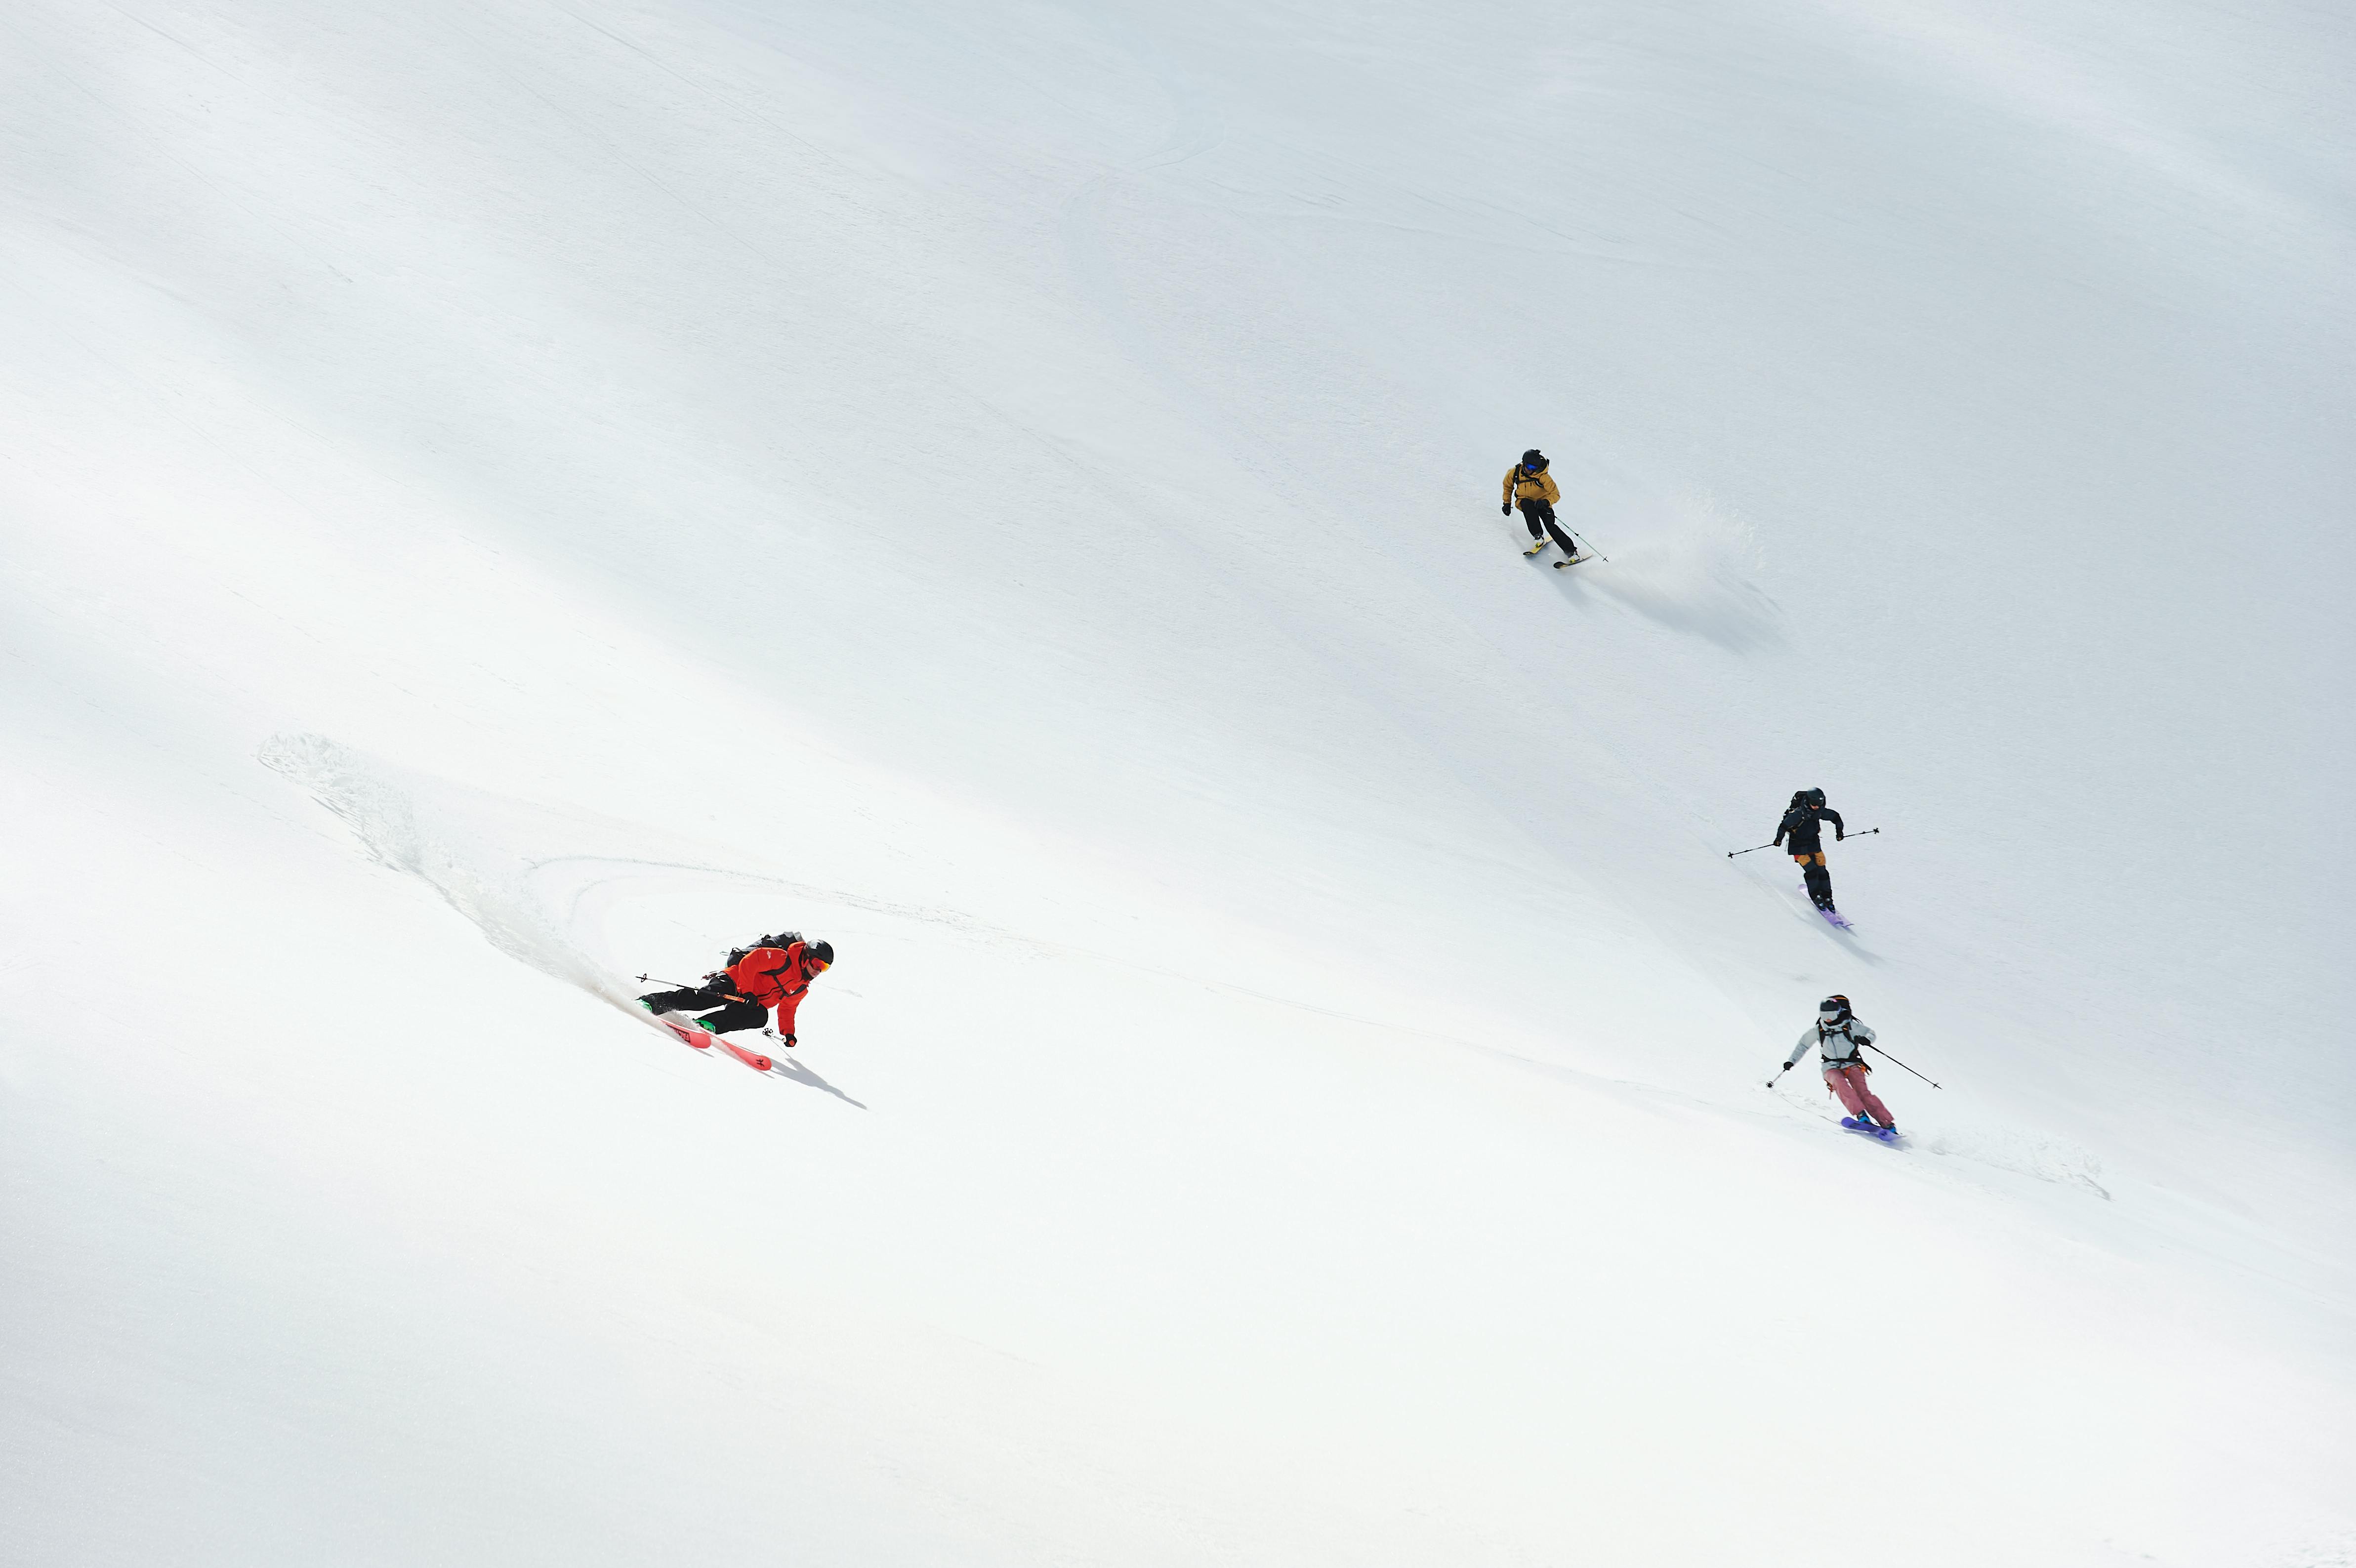 Four skiers creating fresh tracks on a pristine snowy slope